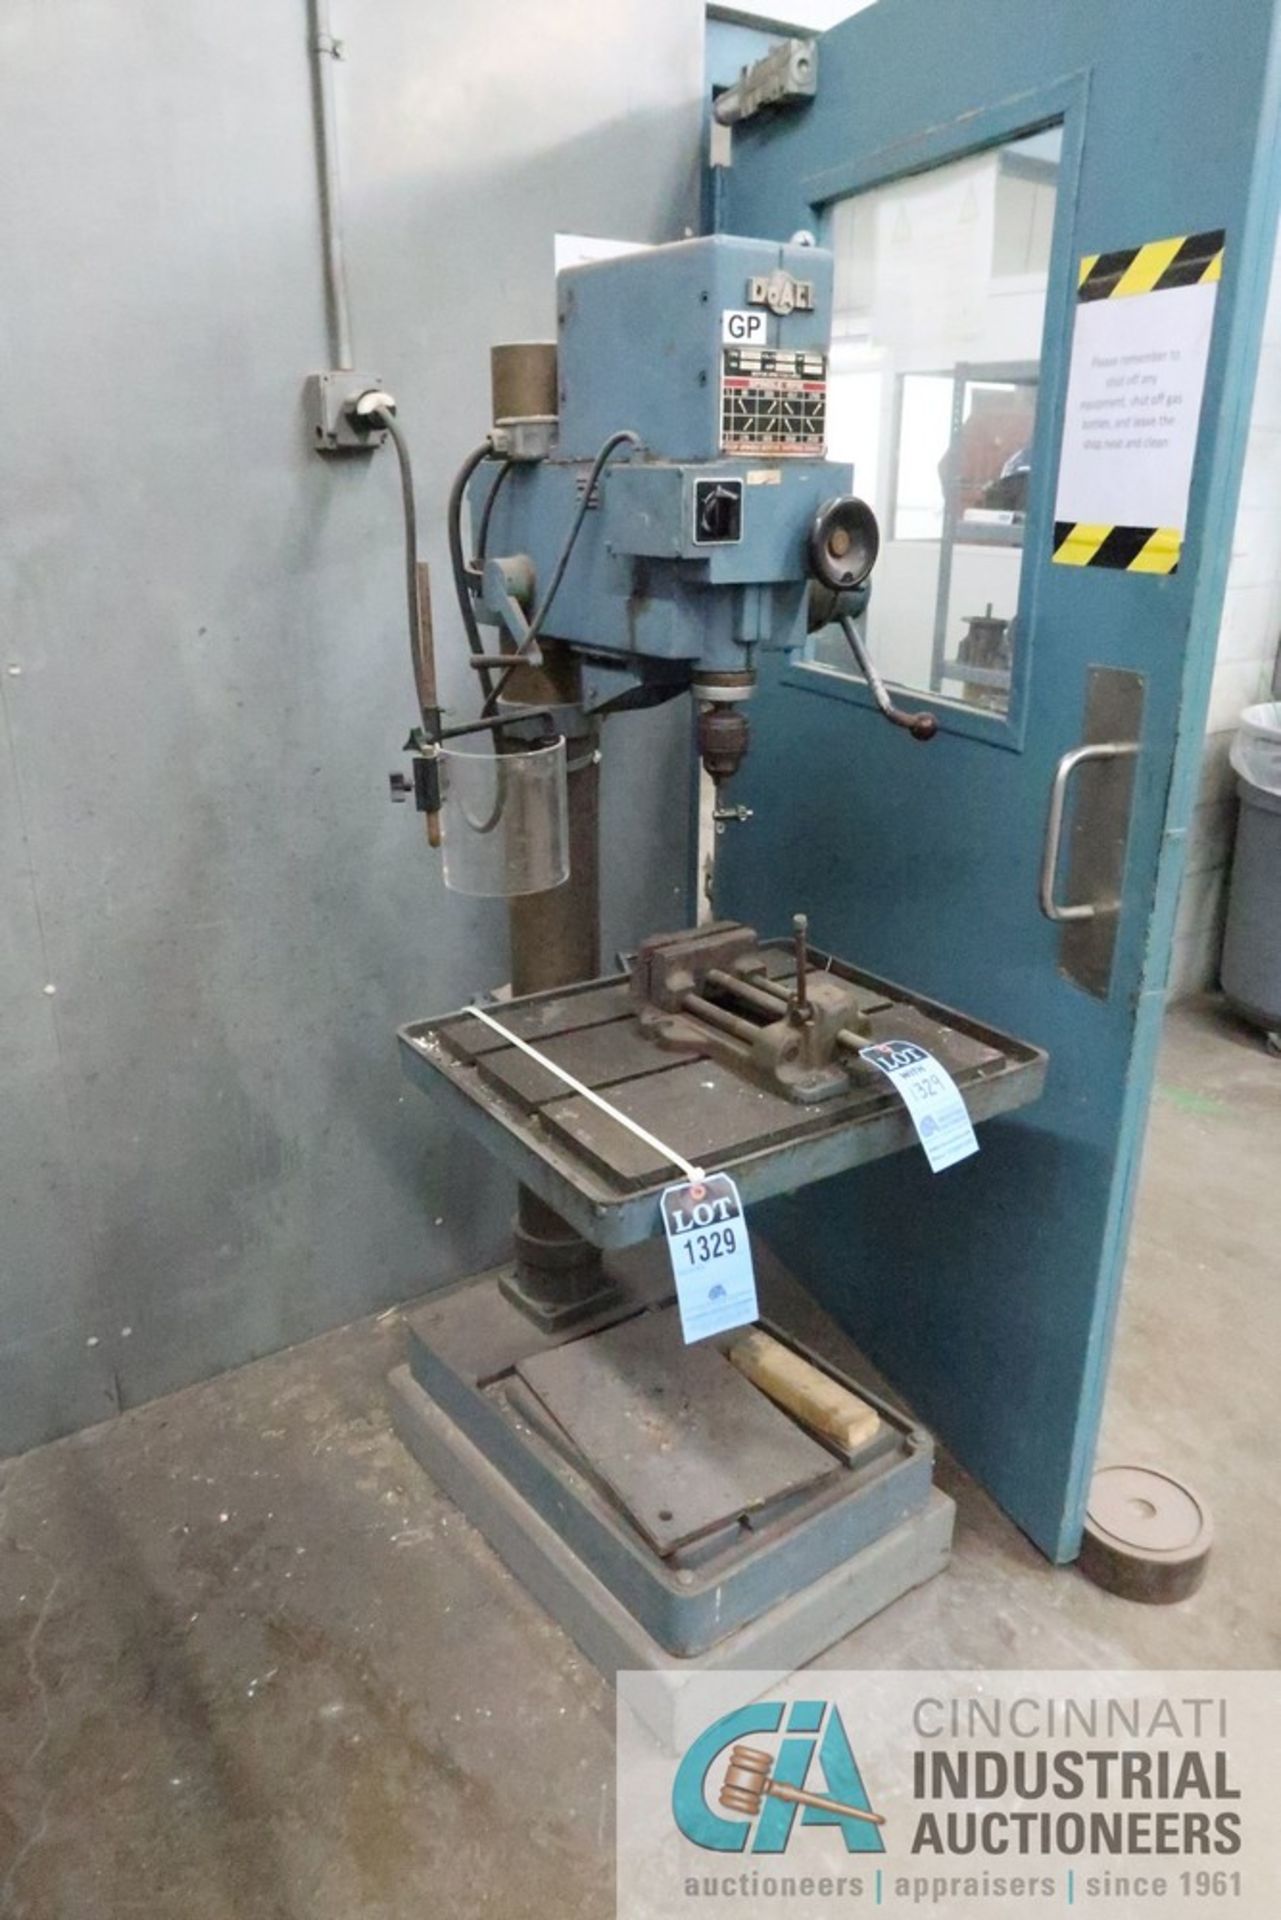 25" DOALL TYPE D-25150 HEAVY DUTY FLOOR DRILL; S/N 38362, 3-PHASE, 230 VOLTS, 85-3,530 SPINDLE